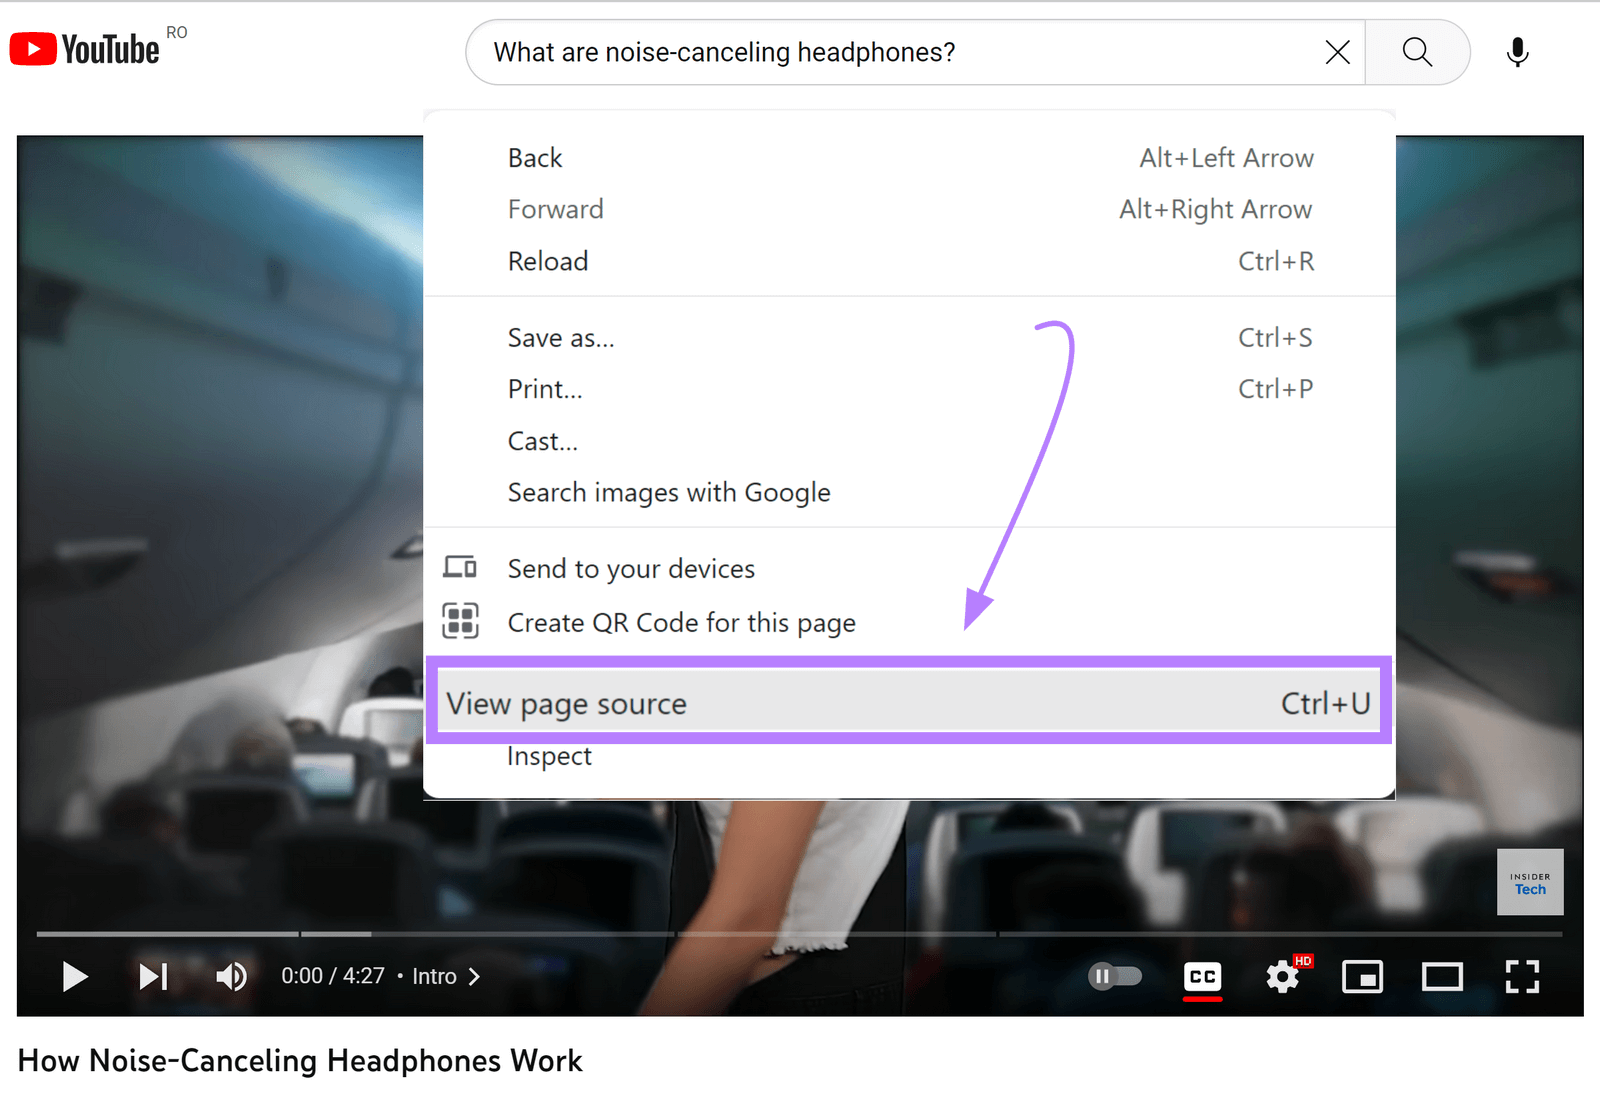 “View page source” option shown for a YouTube video